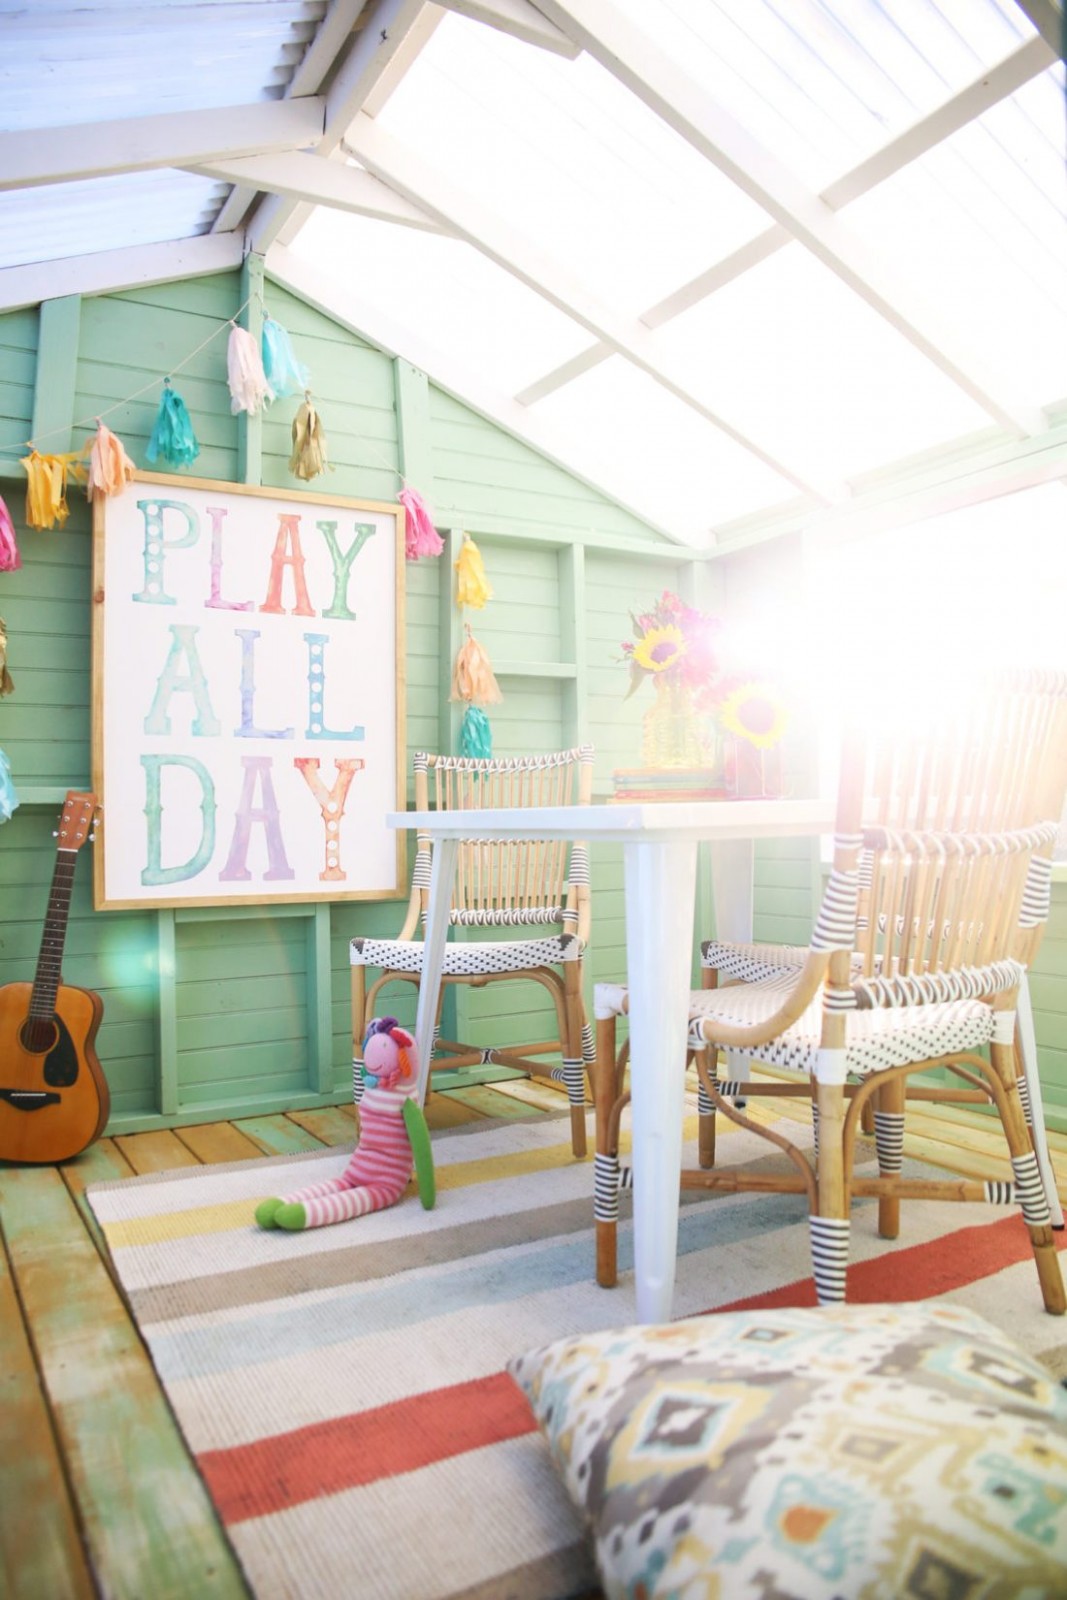 Play All Day Giveaway The Handmade Home Hobby Lobby Furniture Sale